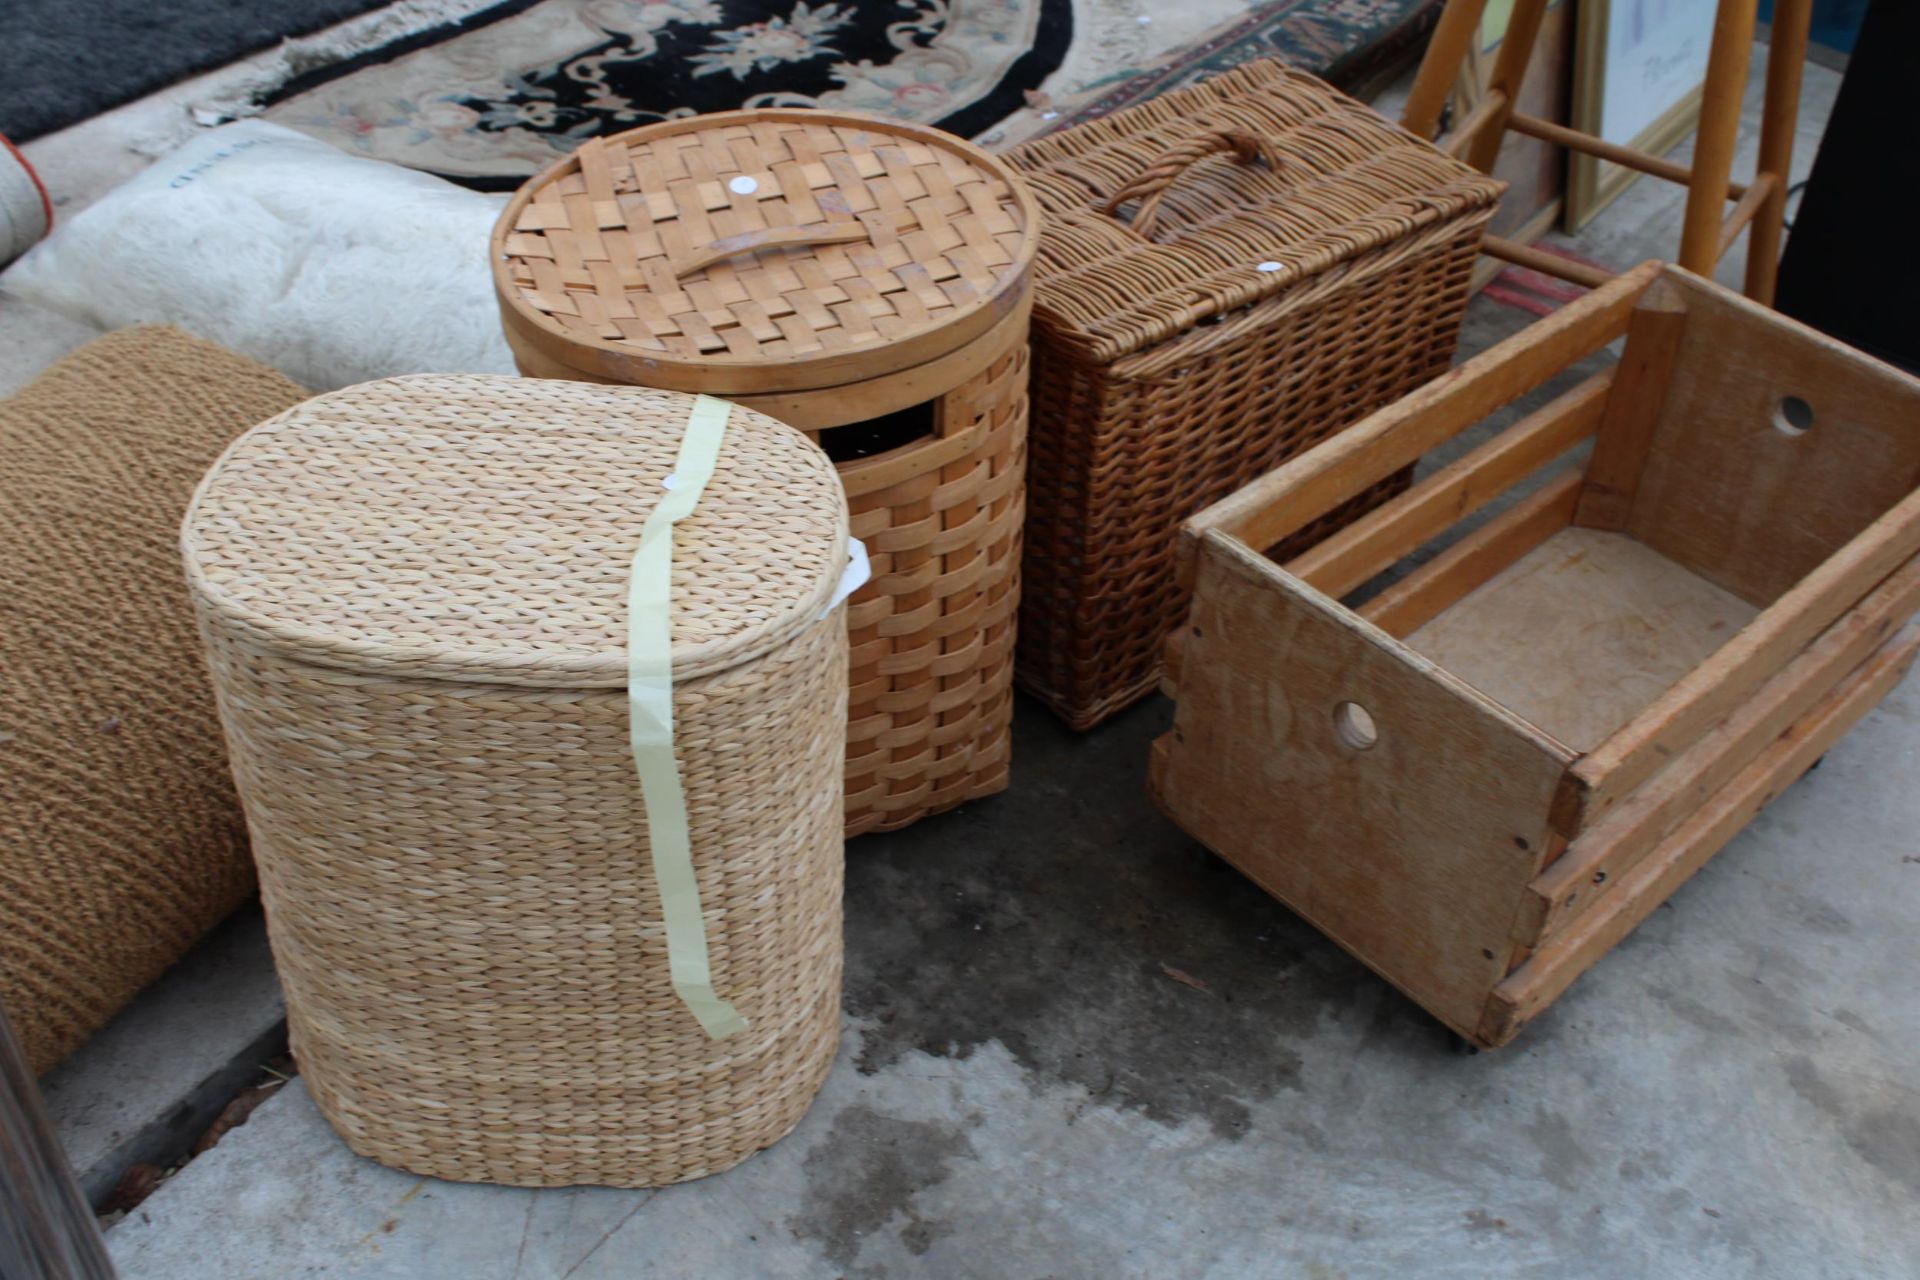 A TALL PINE STOOL, WICKER BASKETS AND A WOODEN BOX ETC - Image 3 of 3